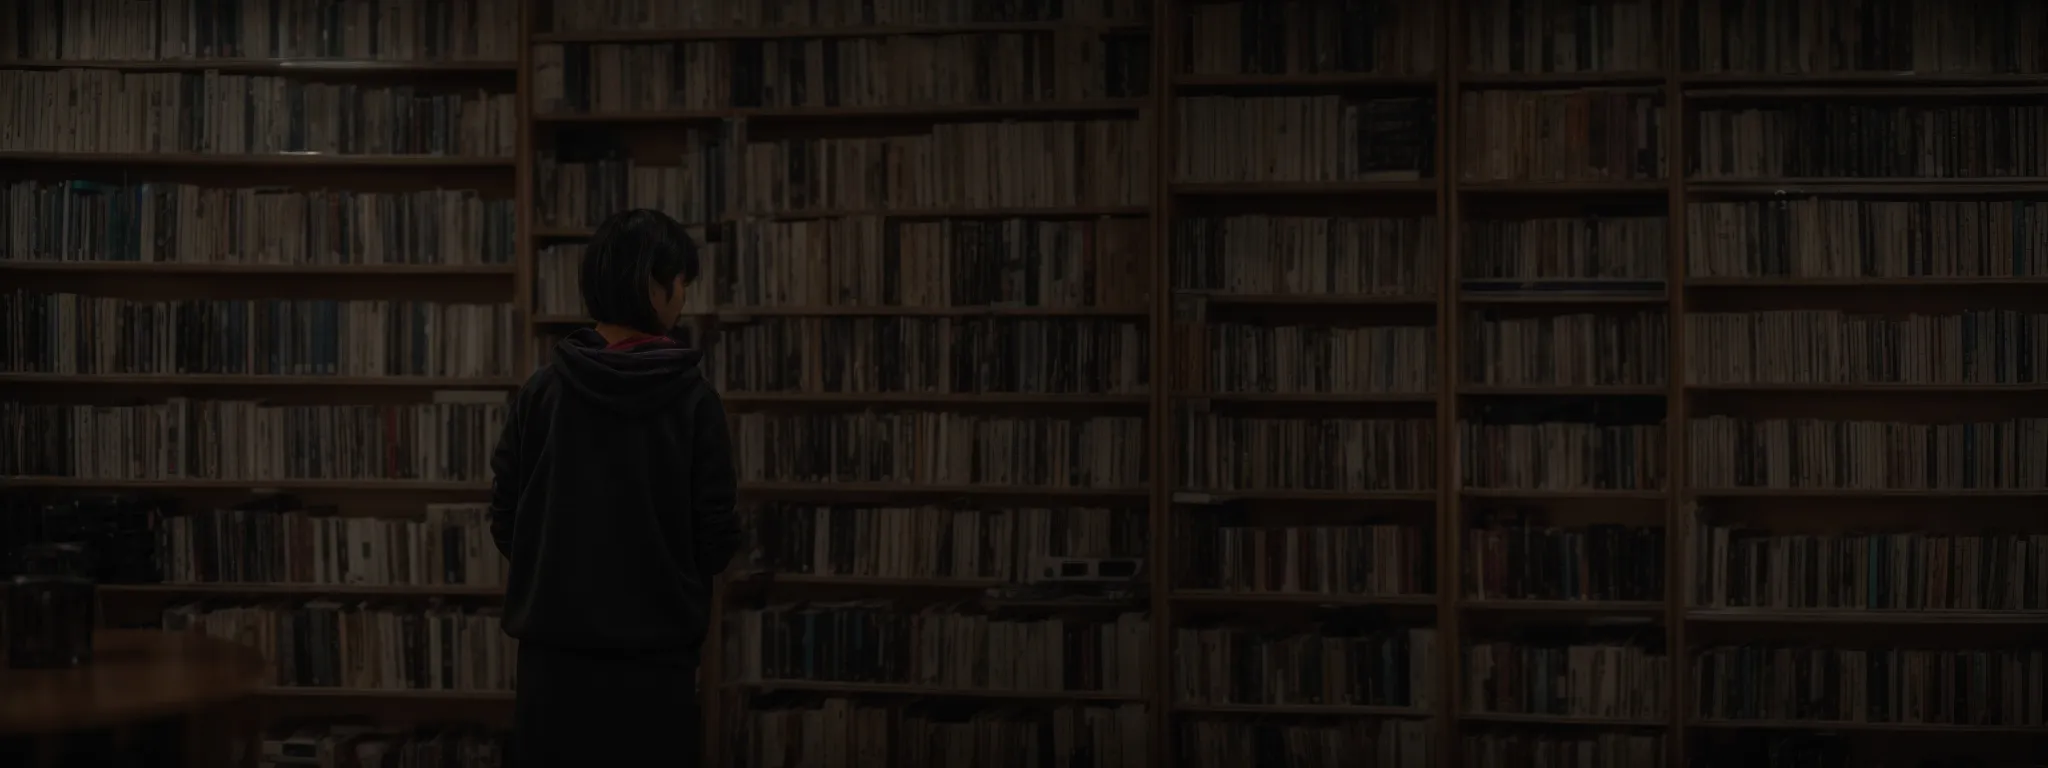 a person standing in front of a neatly organized bookshelf that categorizes topics seamlessly.